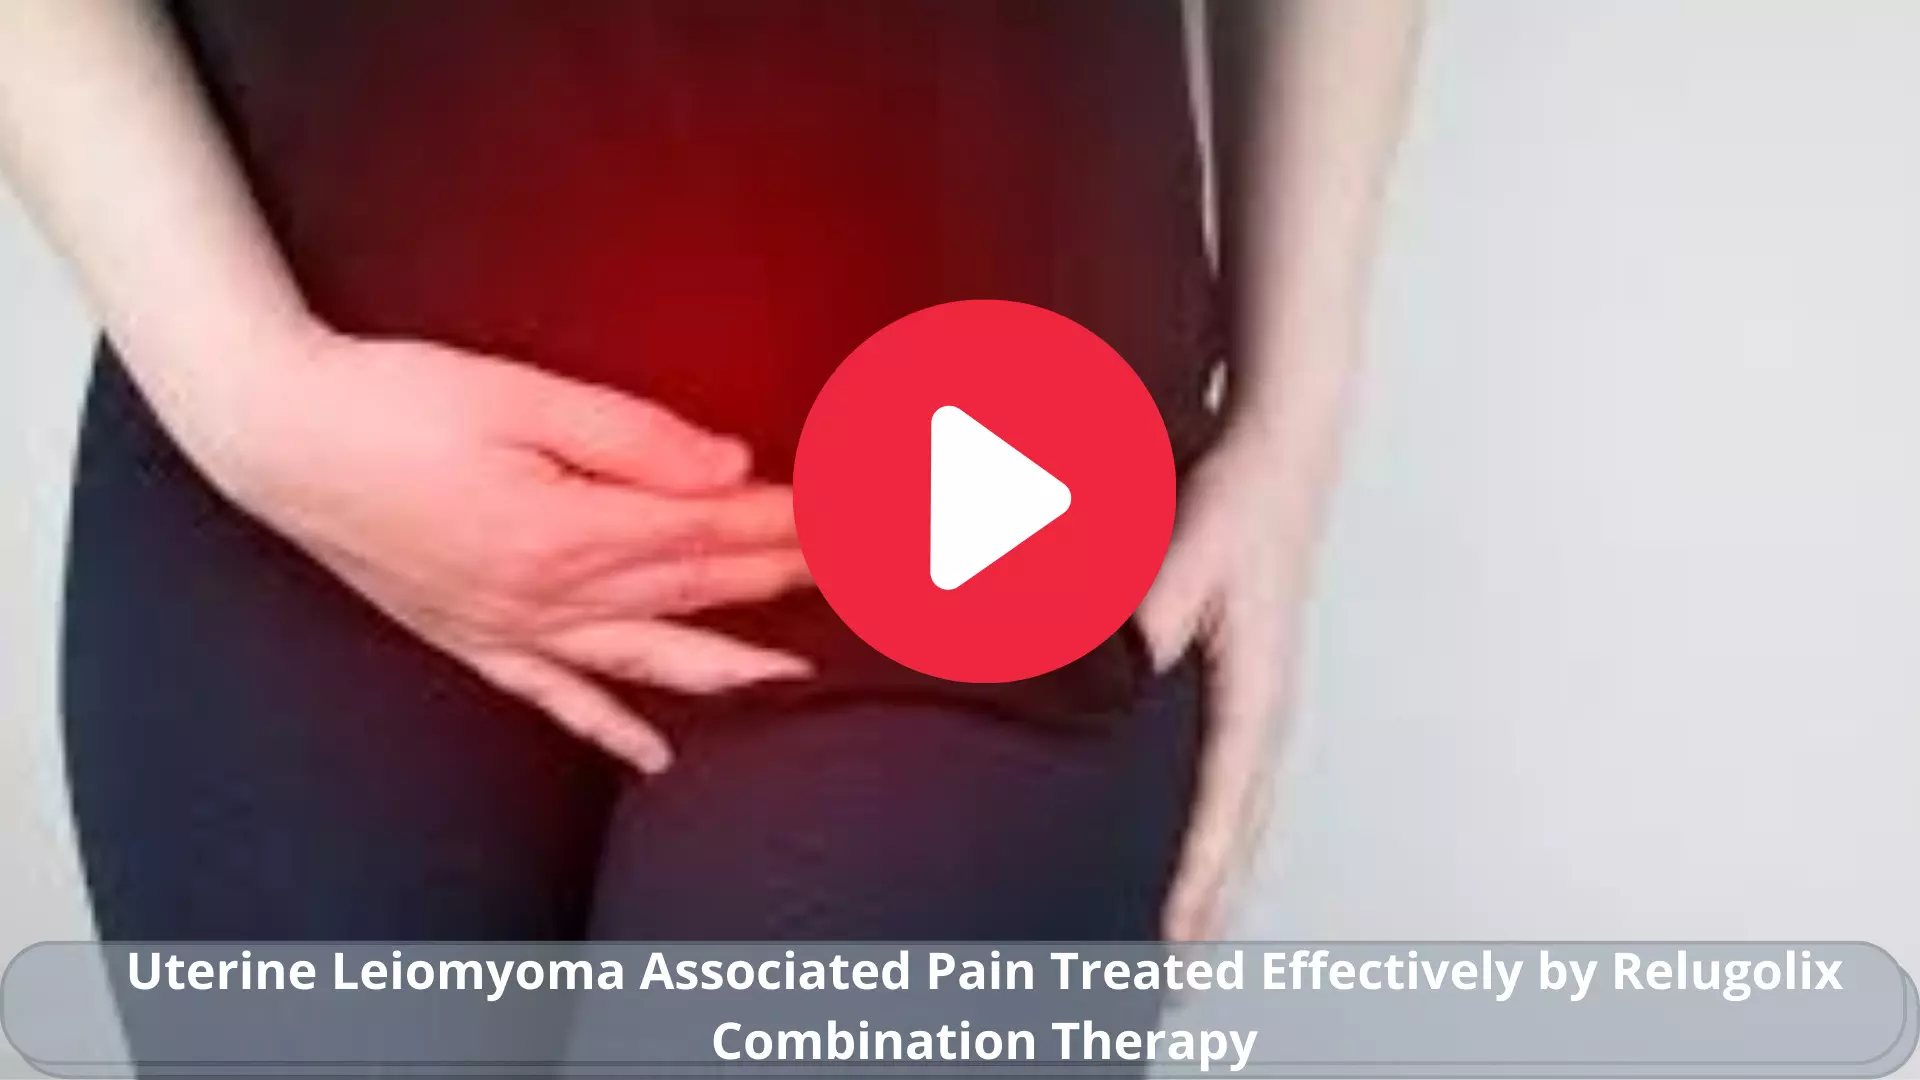 Uterine Leiomyoma Associated Pain Treated Effectively by Relugolix Combination Therapy